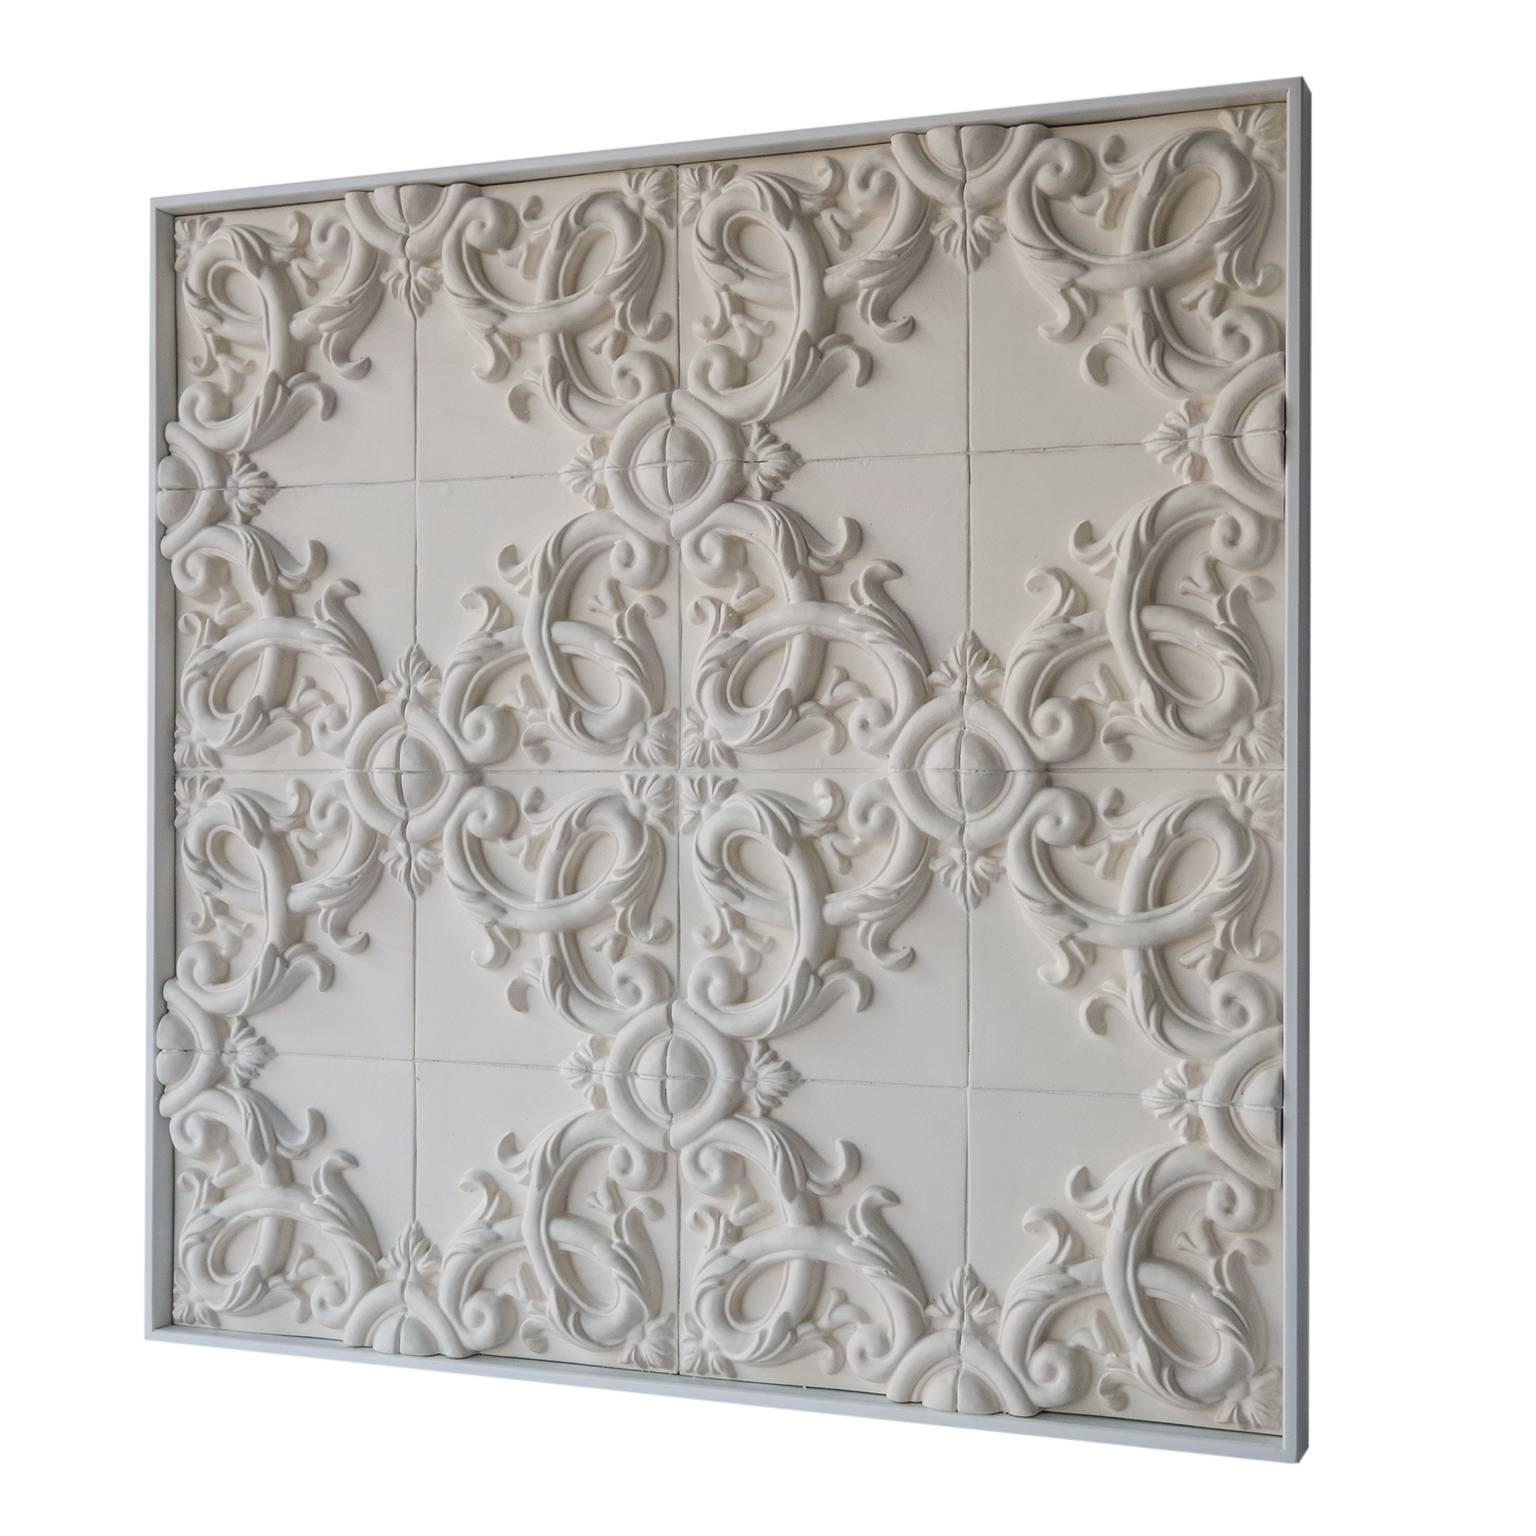 This elegant panel in three-dimensional baroque ceramic whit floral decor is handmade in Italy by highly-skilled artisans.
From the search of the Bevilacqua brothers, sons of art, ceramists for tradition and passion, the floral decoration typical of